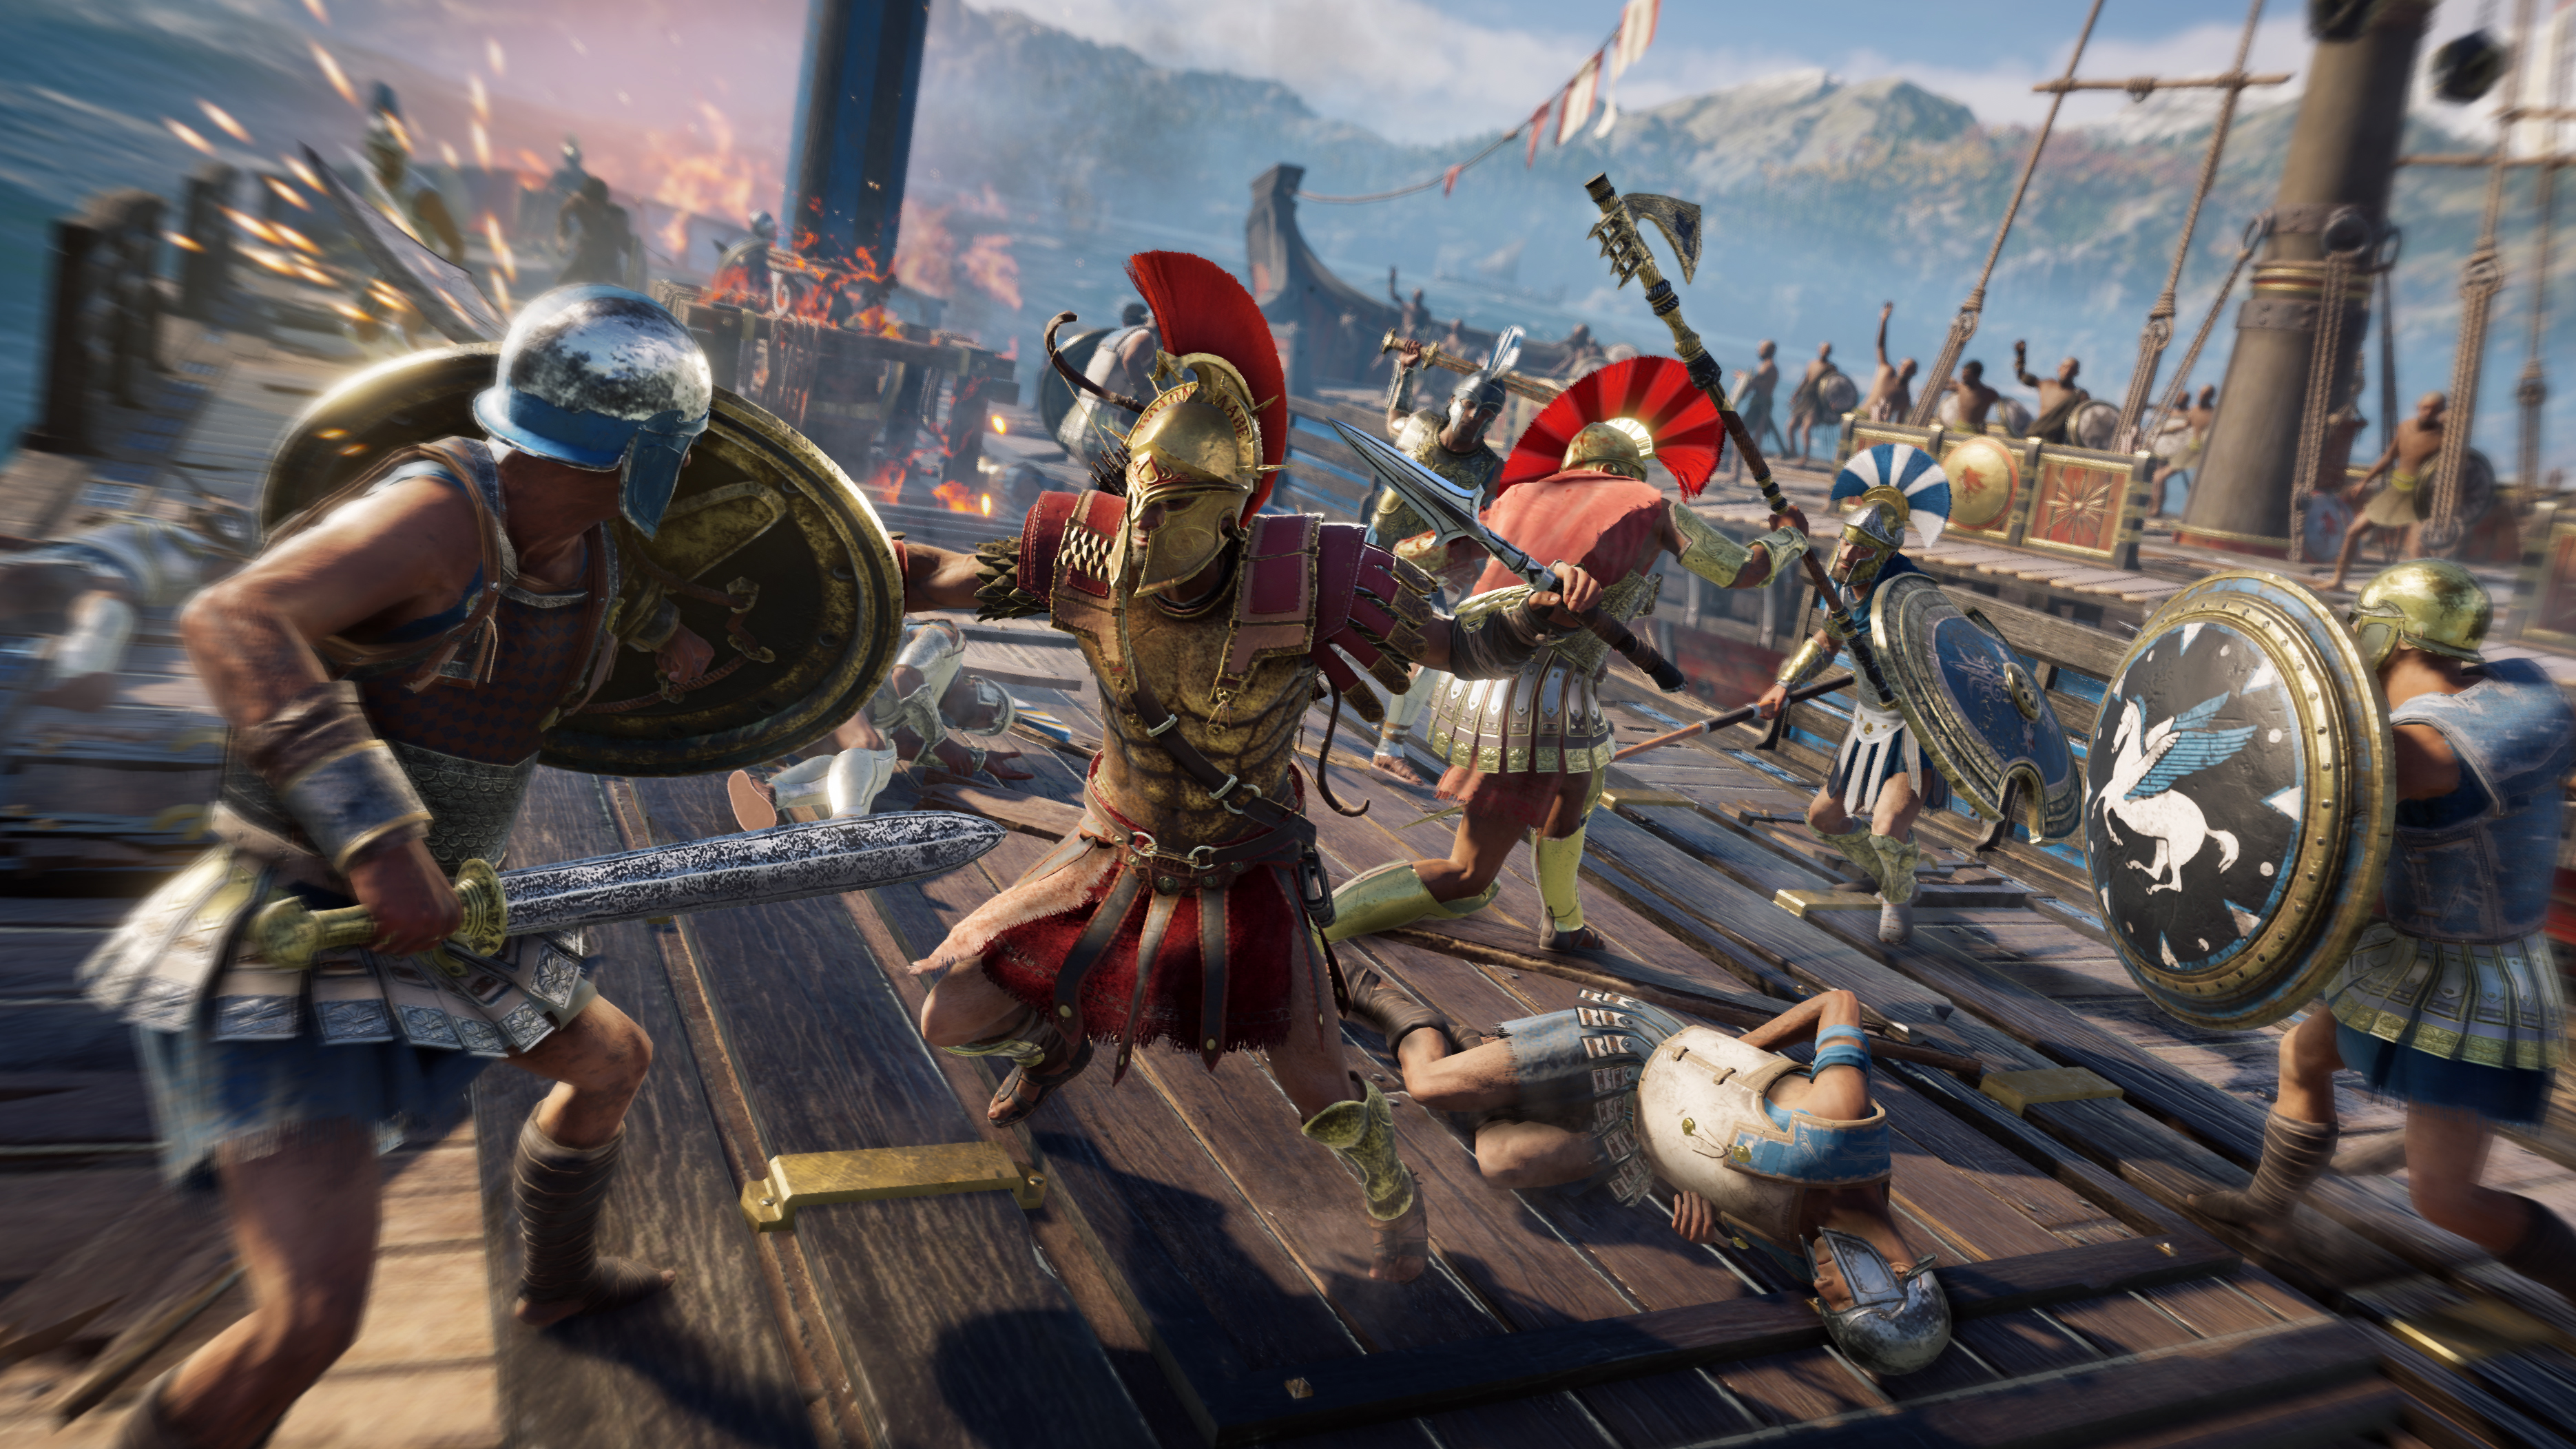 Best single player PC games: Assassin's Creed: Odyssey